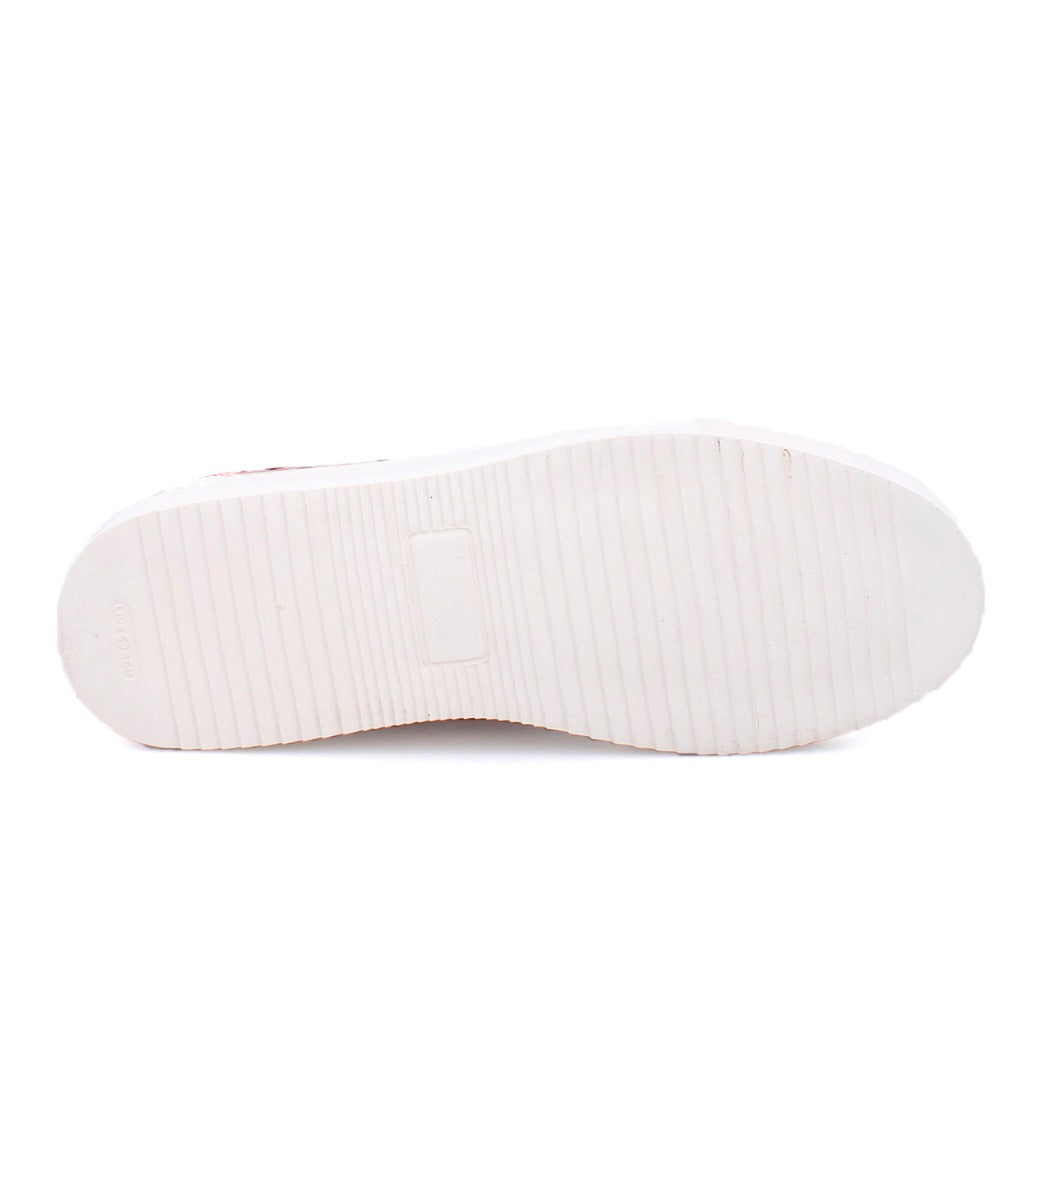 A Lyne sneaker with white soles on a white background. (Brand: Bed Stu)